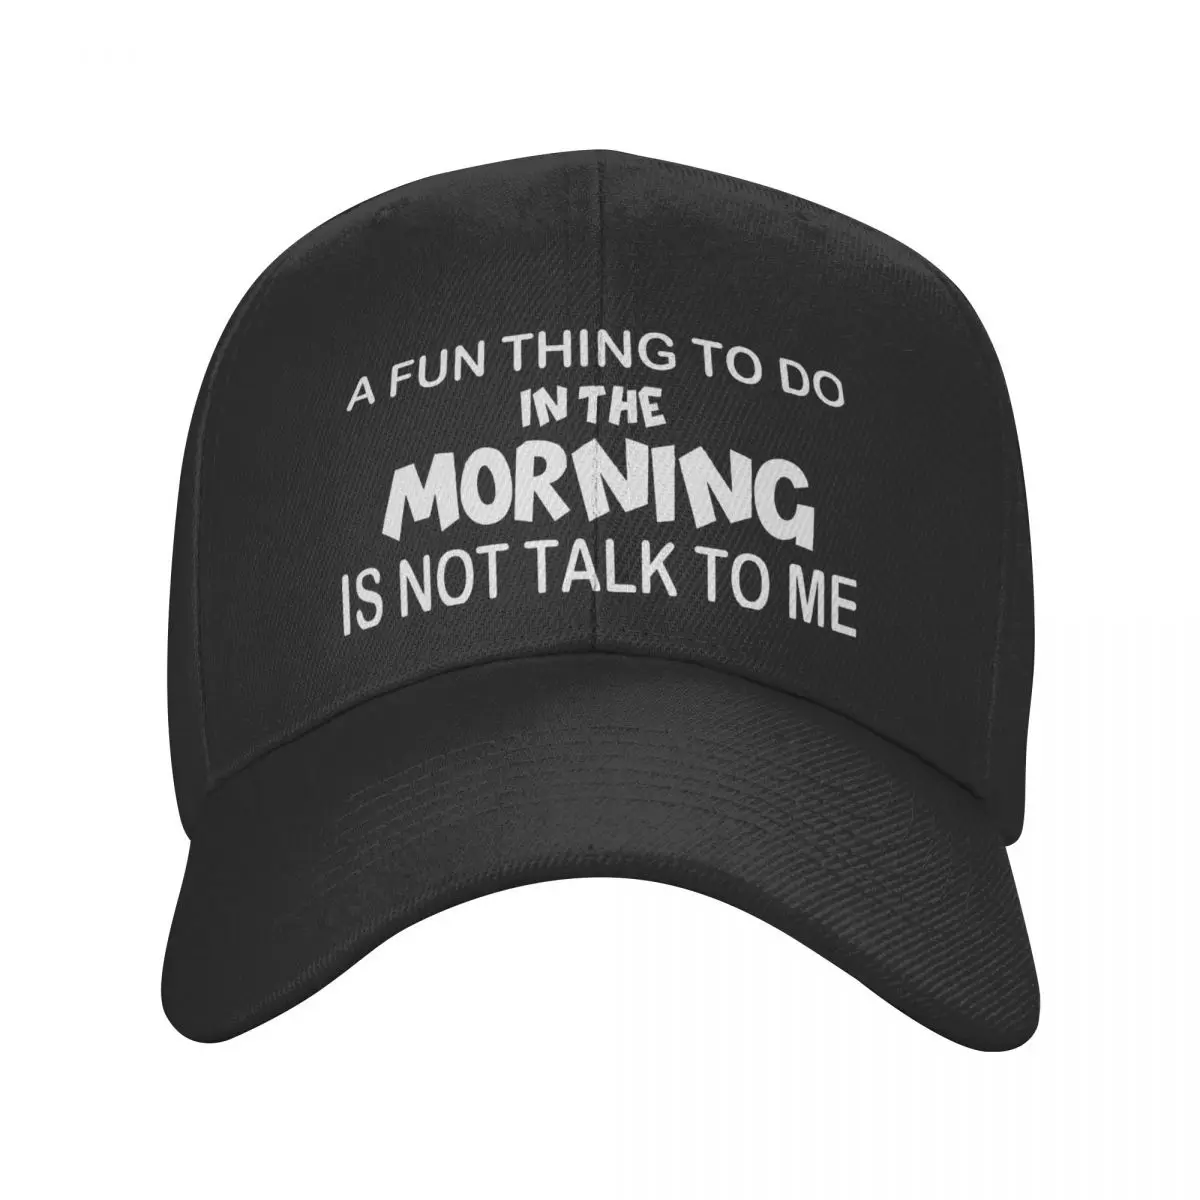 

A Fun Thing To Do In The Morning Is Not Talk To Me Casquette, Polyester Cap Modern Hat Wicking Adjustable Cap Nice Gift